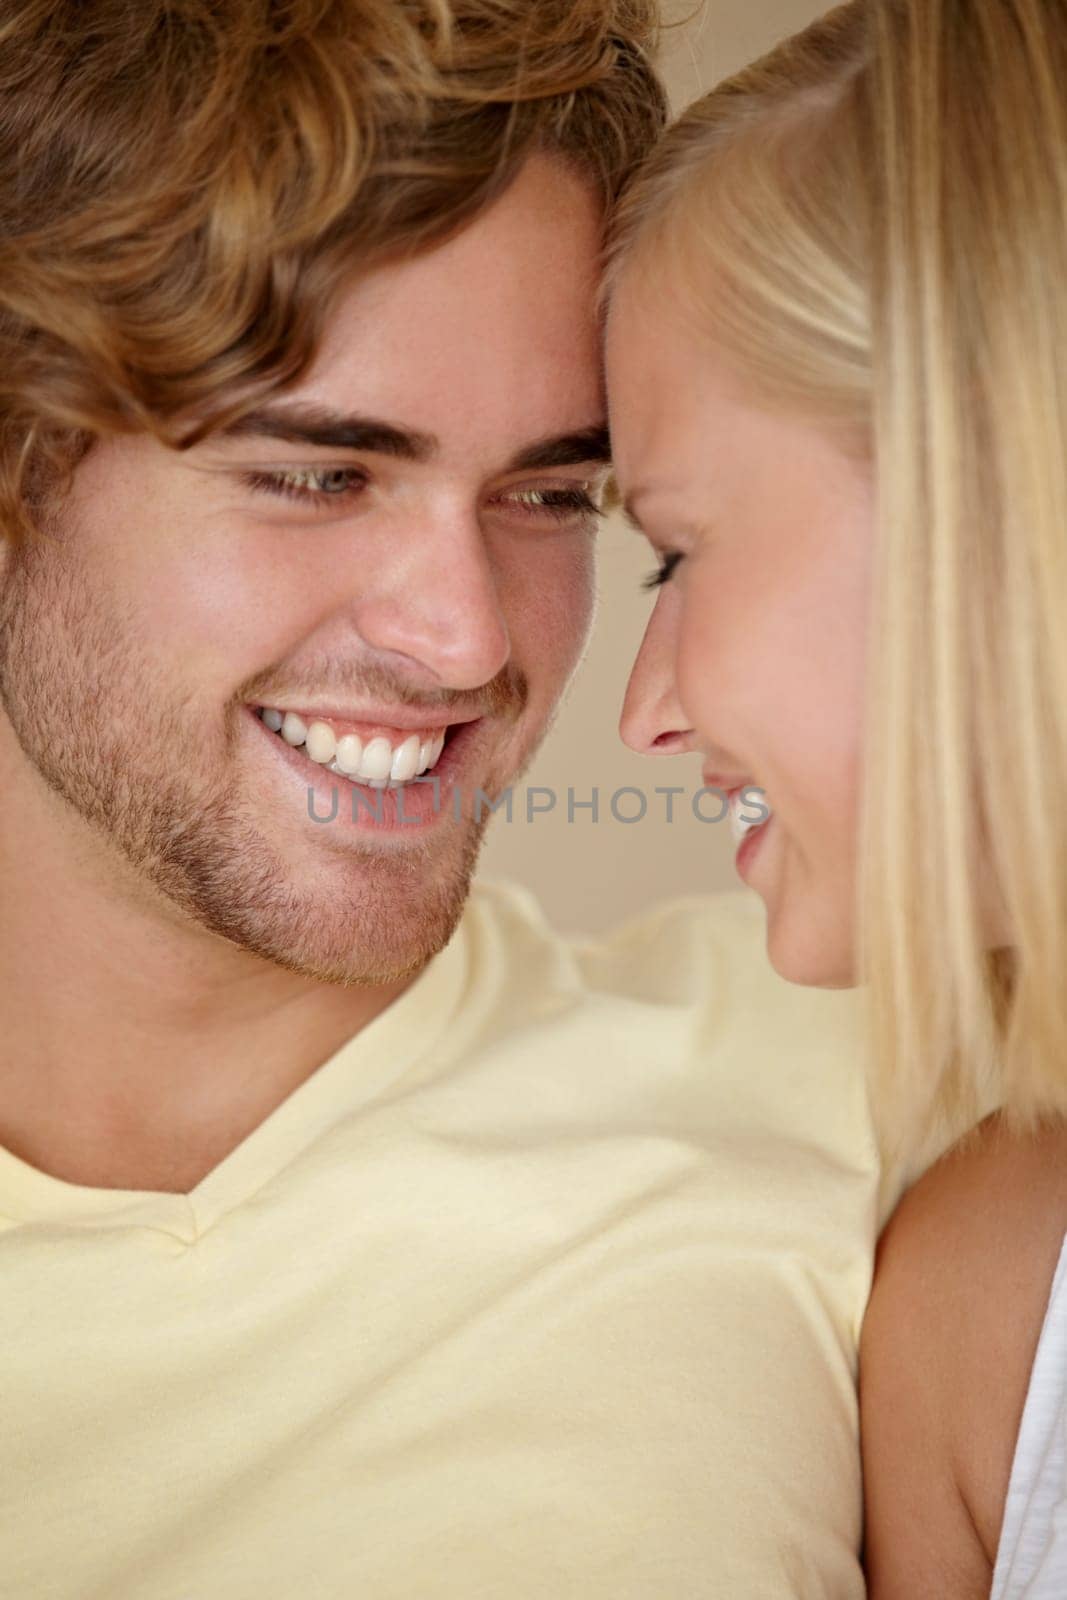 Face, love and relax with a young couple closeup in their home together for romance or bonding. Smile, happy or dating with a man and woman in their apartment to relax during a weekend break.